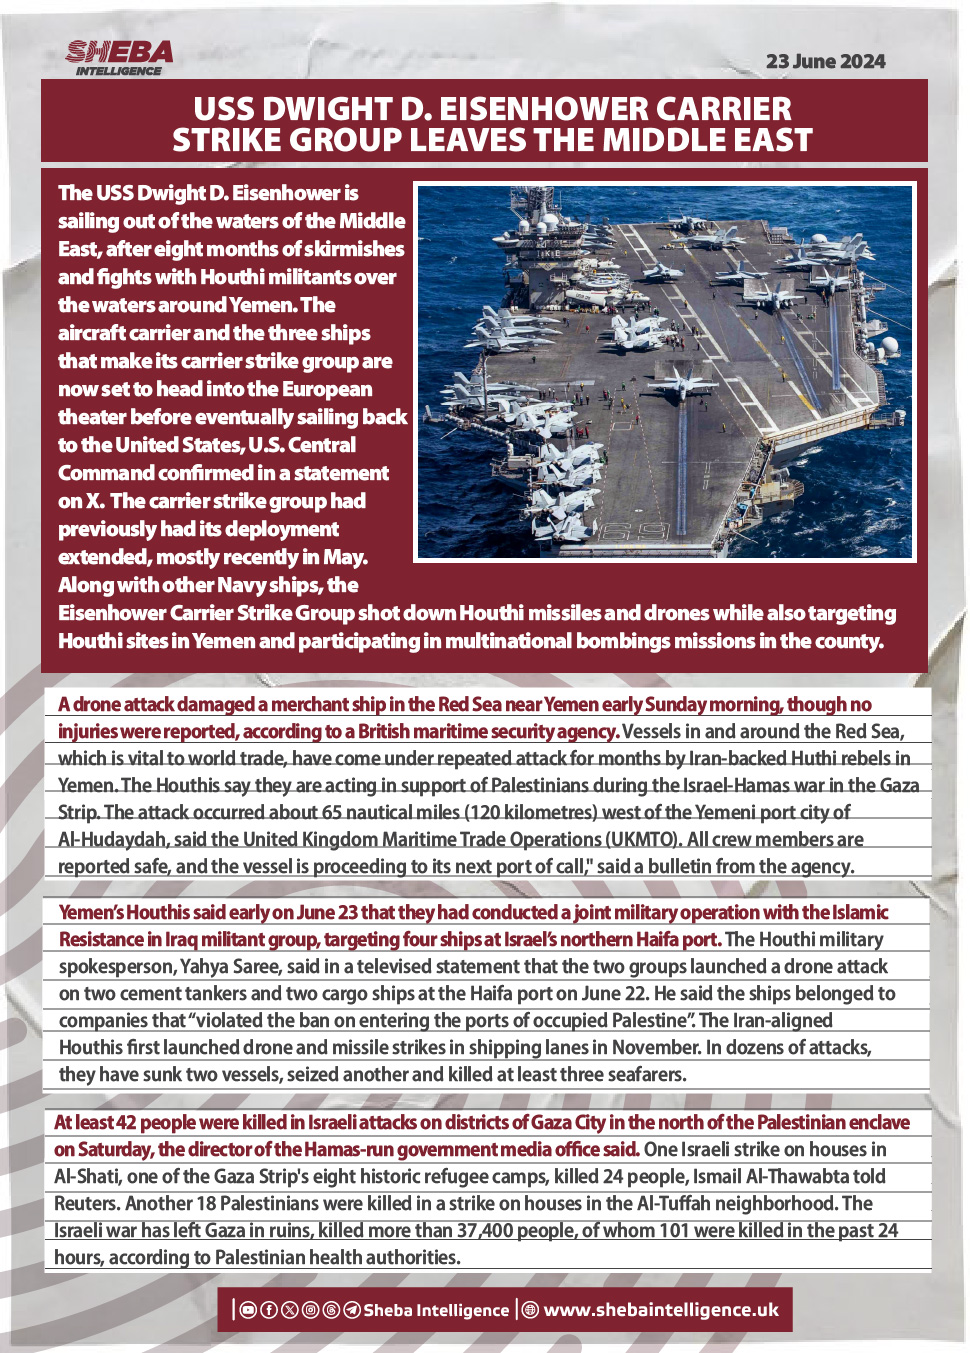 USS Dwight D. Eisenhower Carrier Strike Group leaves the Middle East